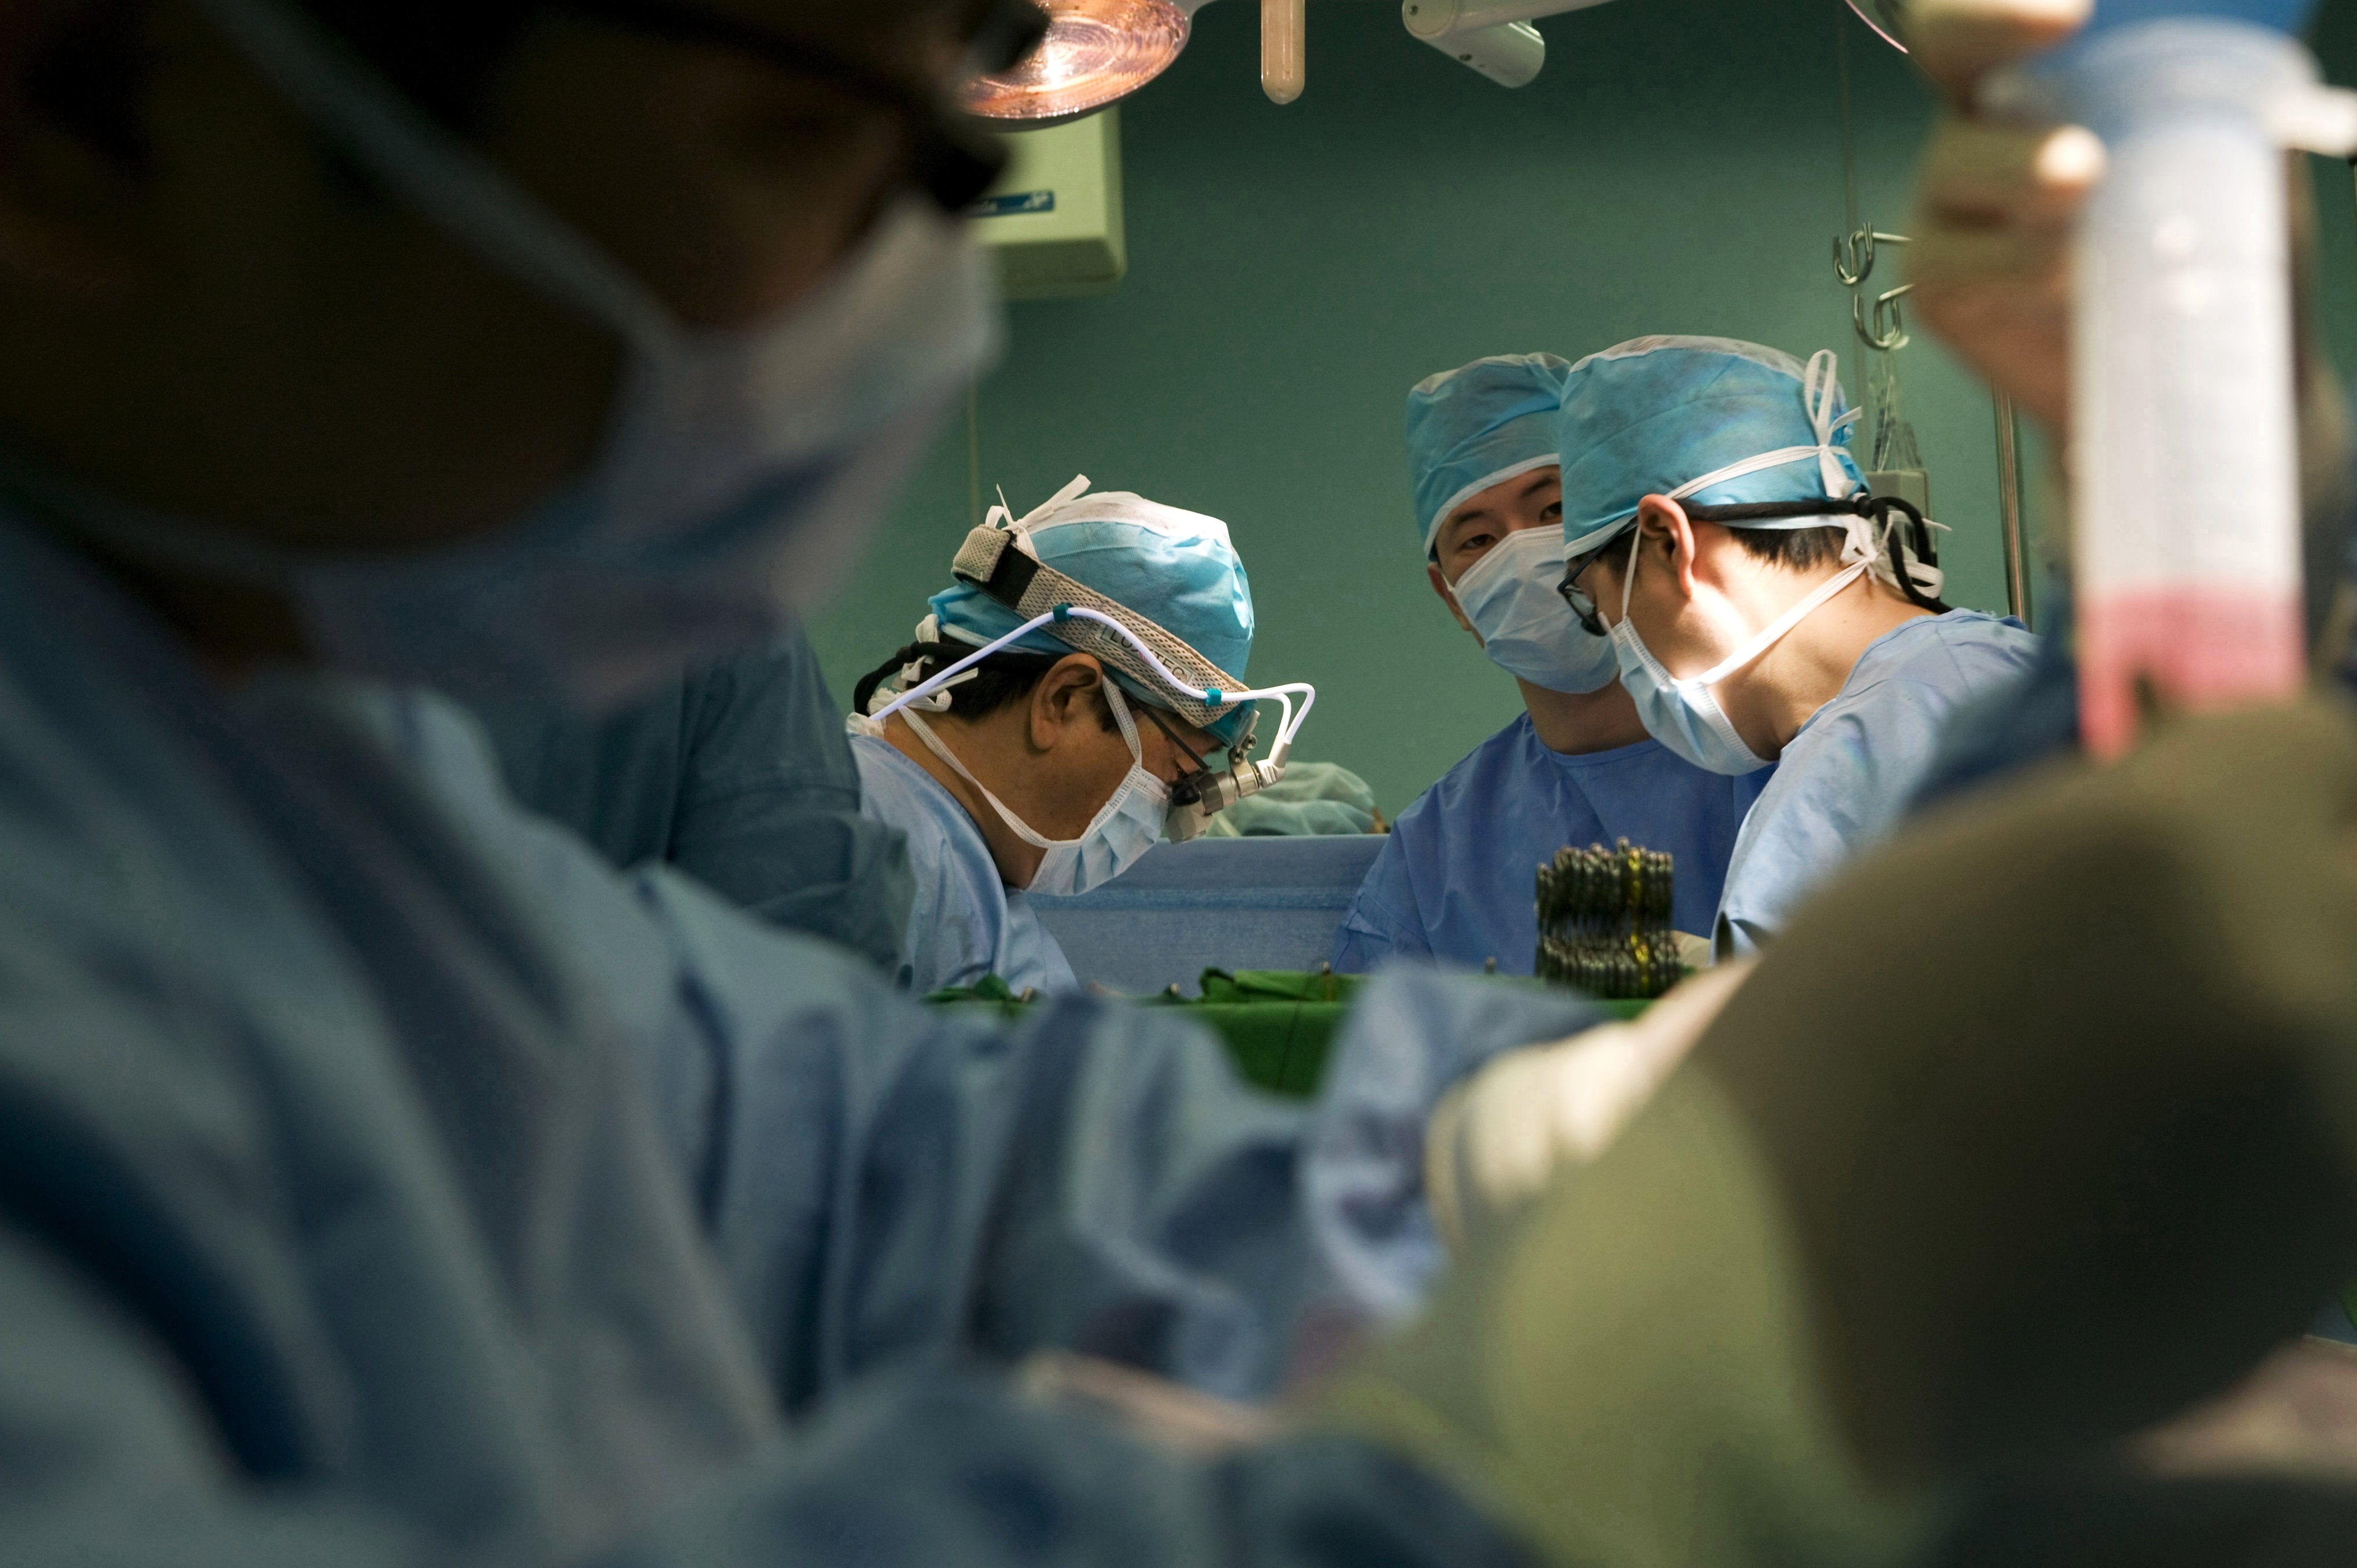 A group of surgeons operate at a hospital in Seoul in November 2008. (Universal Images Group/Getty Images)